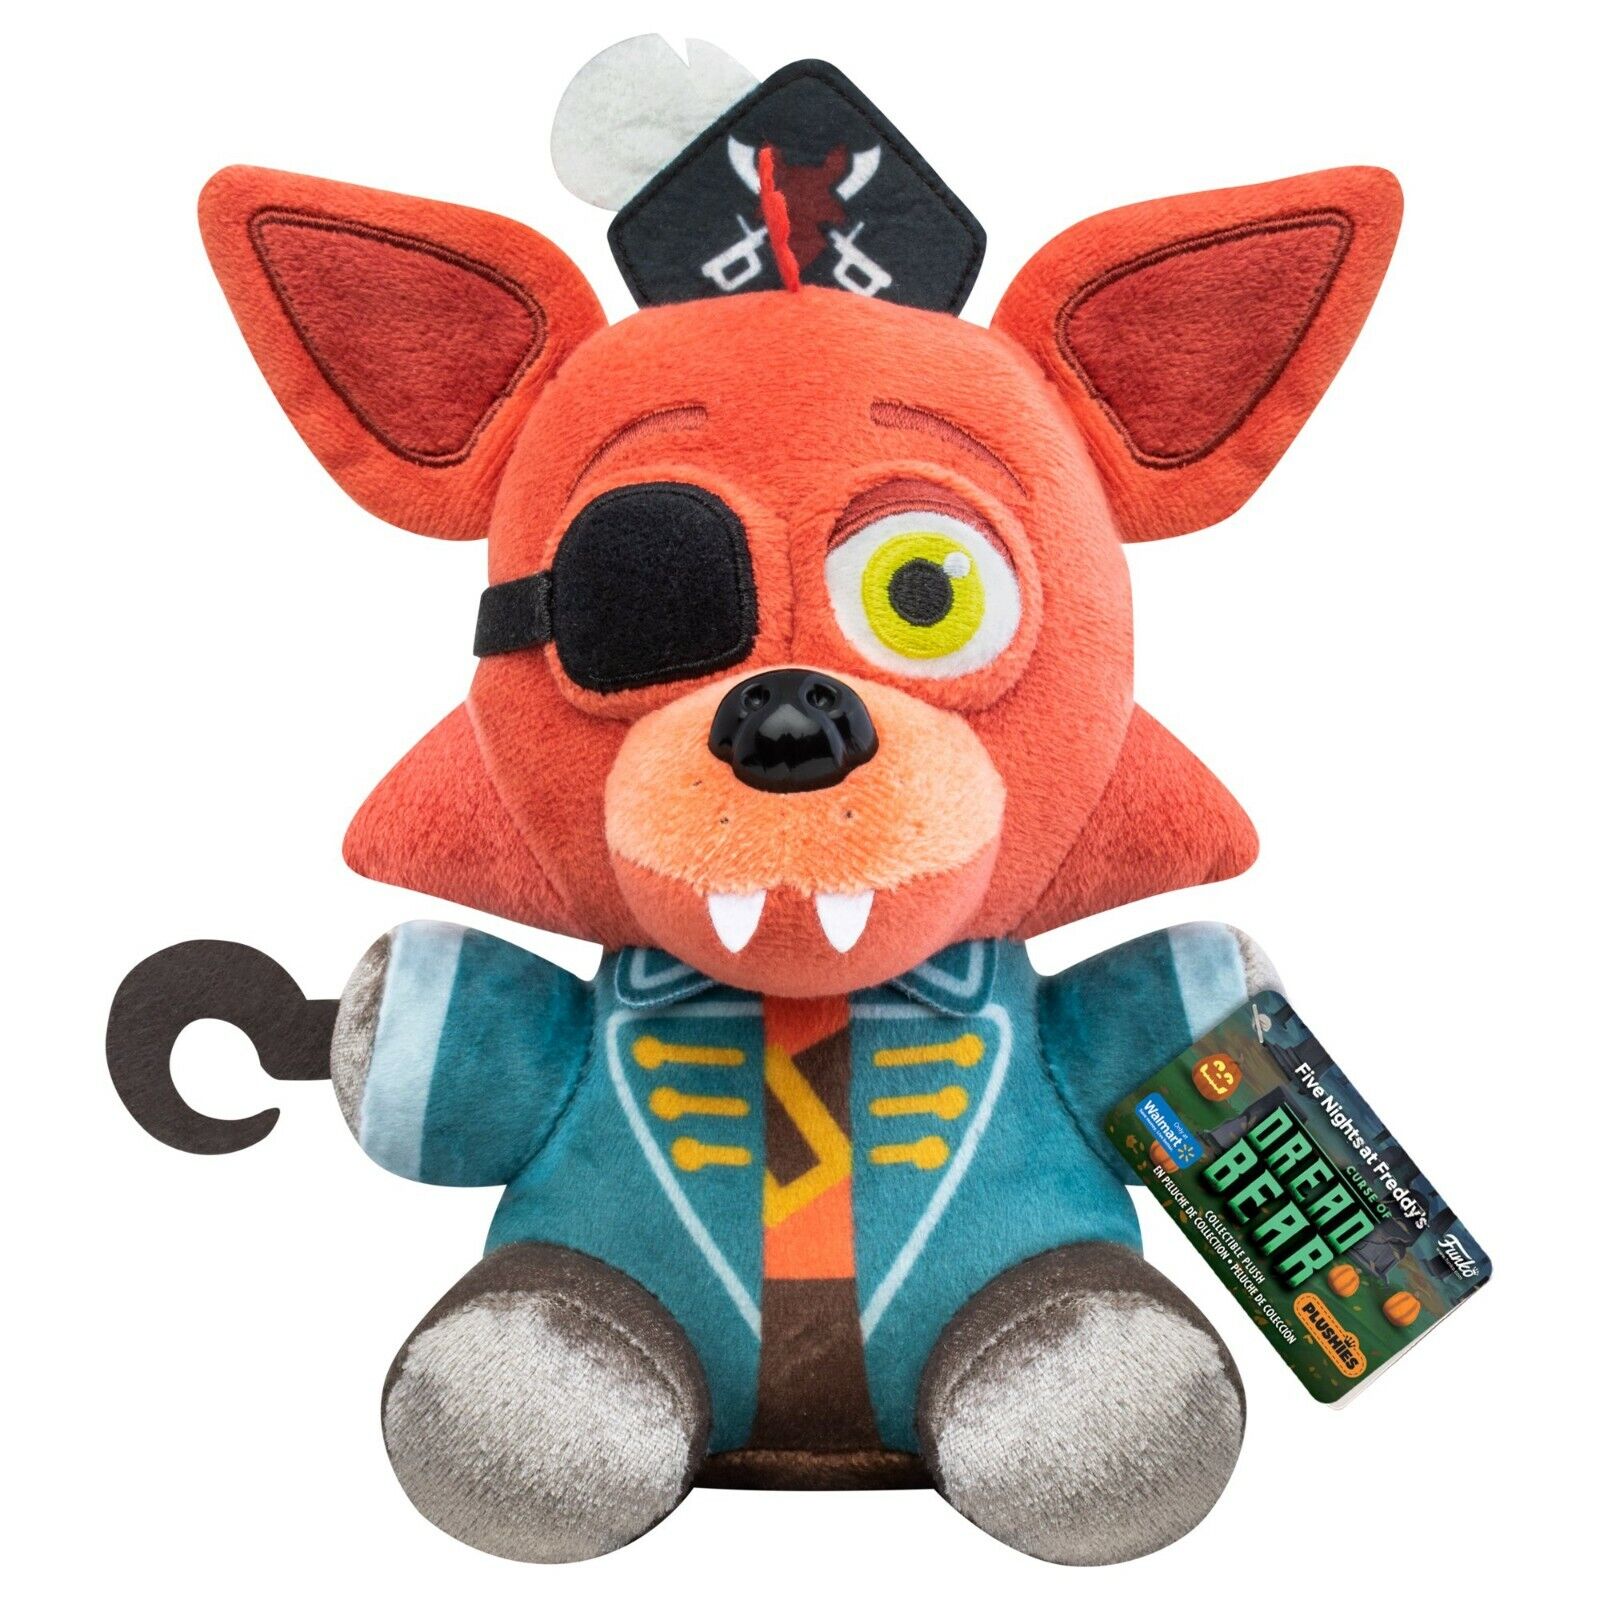 Fnaf Collectible Five Nights At Freddy's Merch Foxy The Pirate